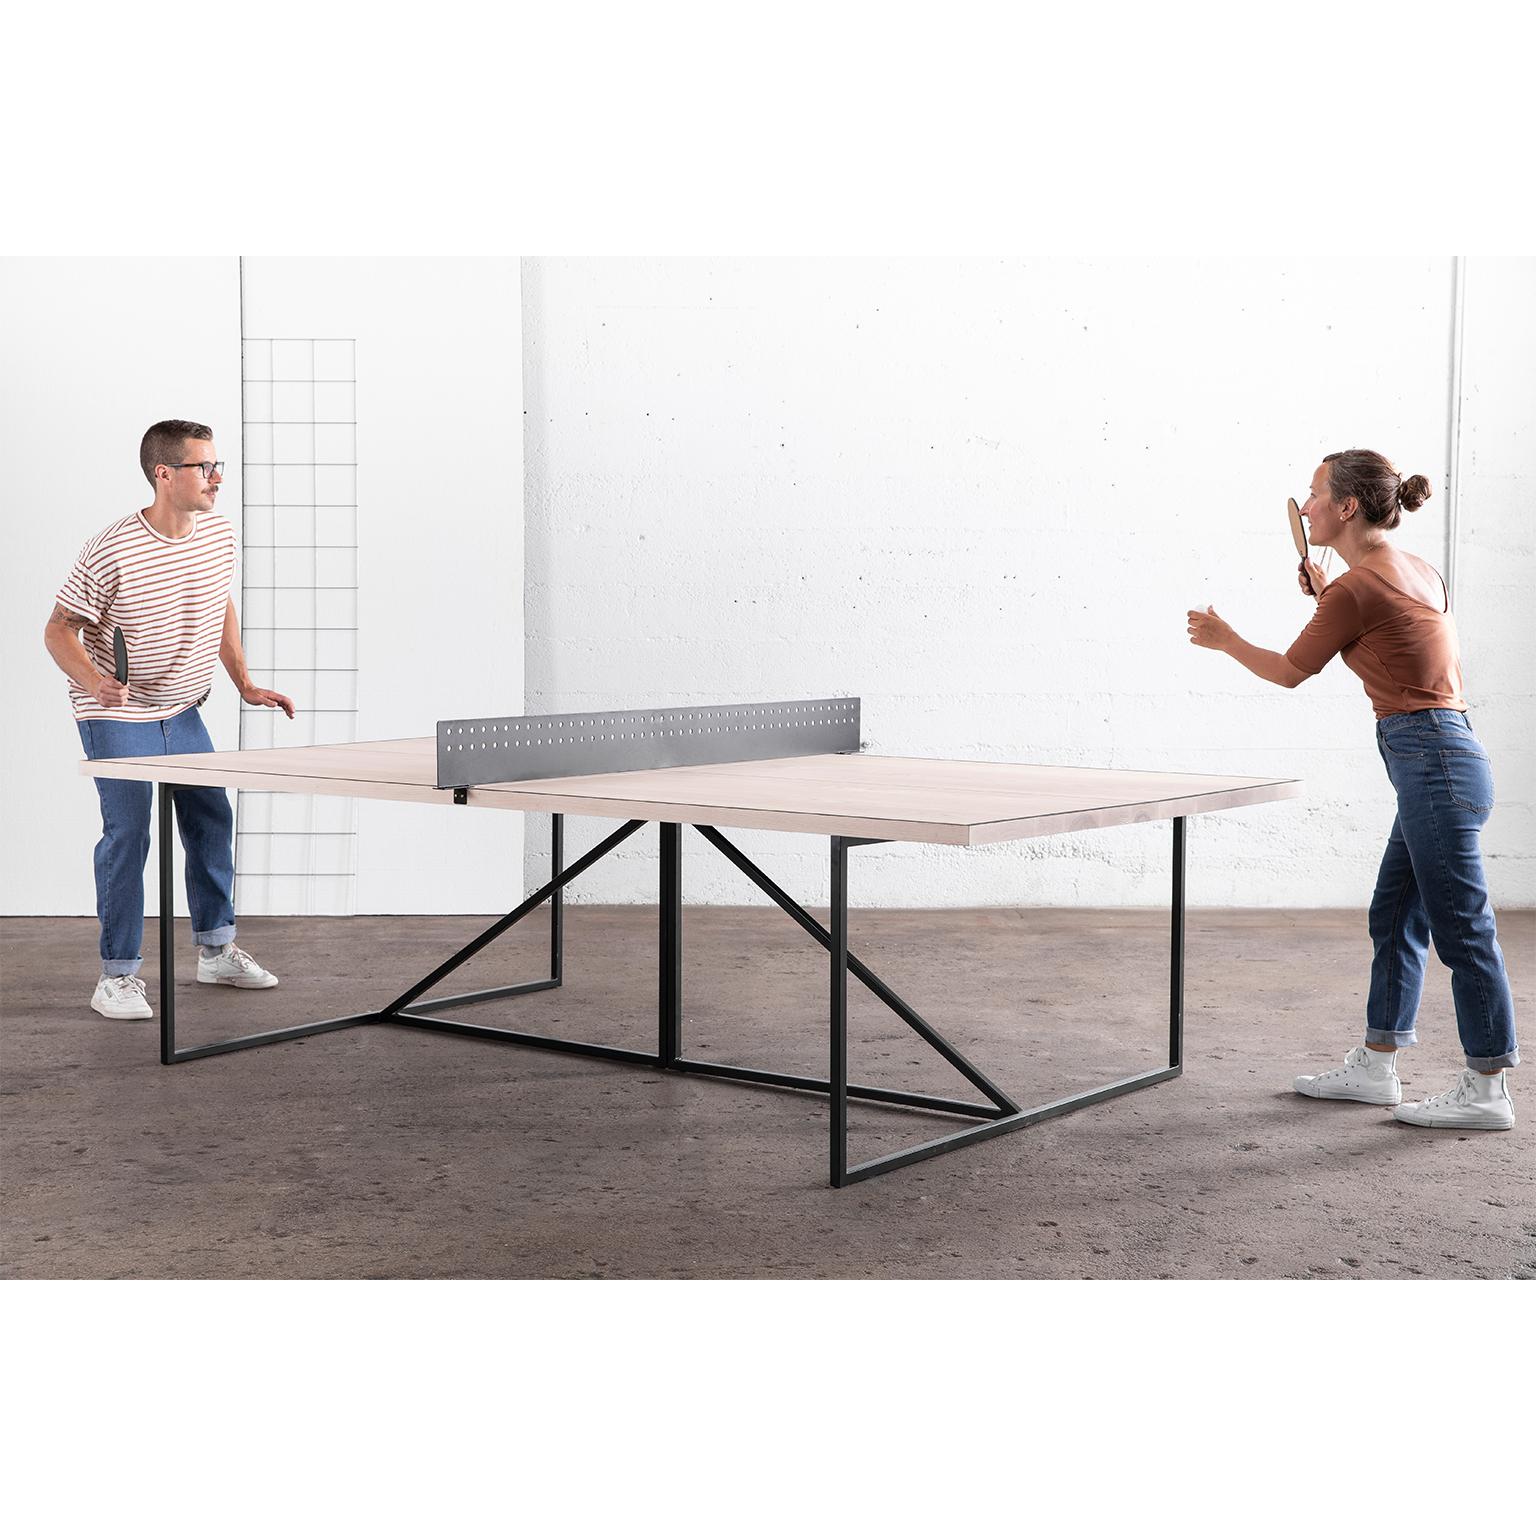 The Break Ping Pong Table gives a modern look to the classic parlour game. You’ll play like a professional on the table’s matte wood playing surface. The frame of the table is hand-welded from durable steel and can be finished in one of our three